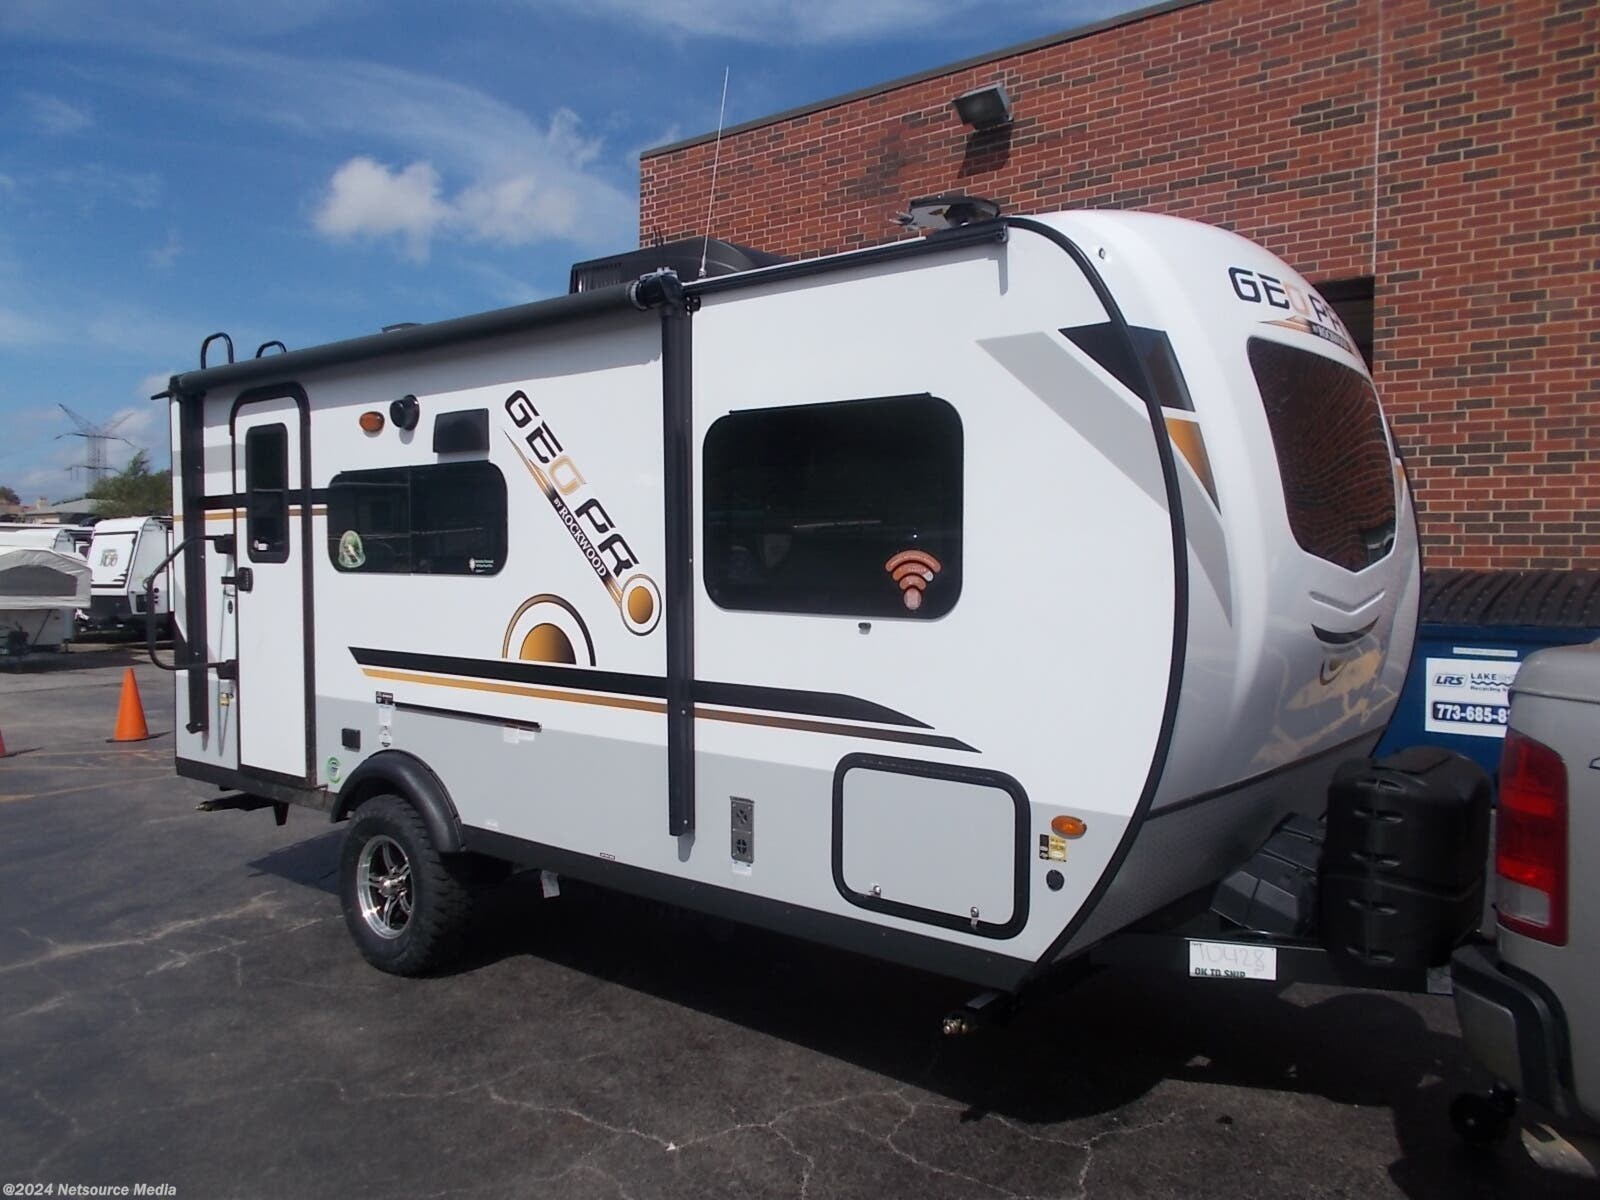 2021 Forest River Rockwood GEO PRO G19FBS RV for Sale in Bridgeview, IL 60455 | RB202119635 2021 Rockwood Geo Pro G19fbs Travel Trailer